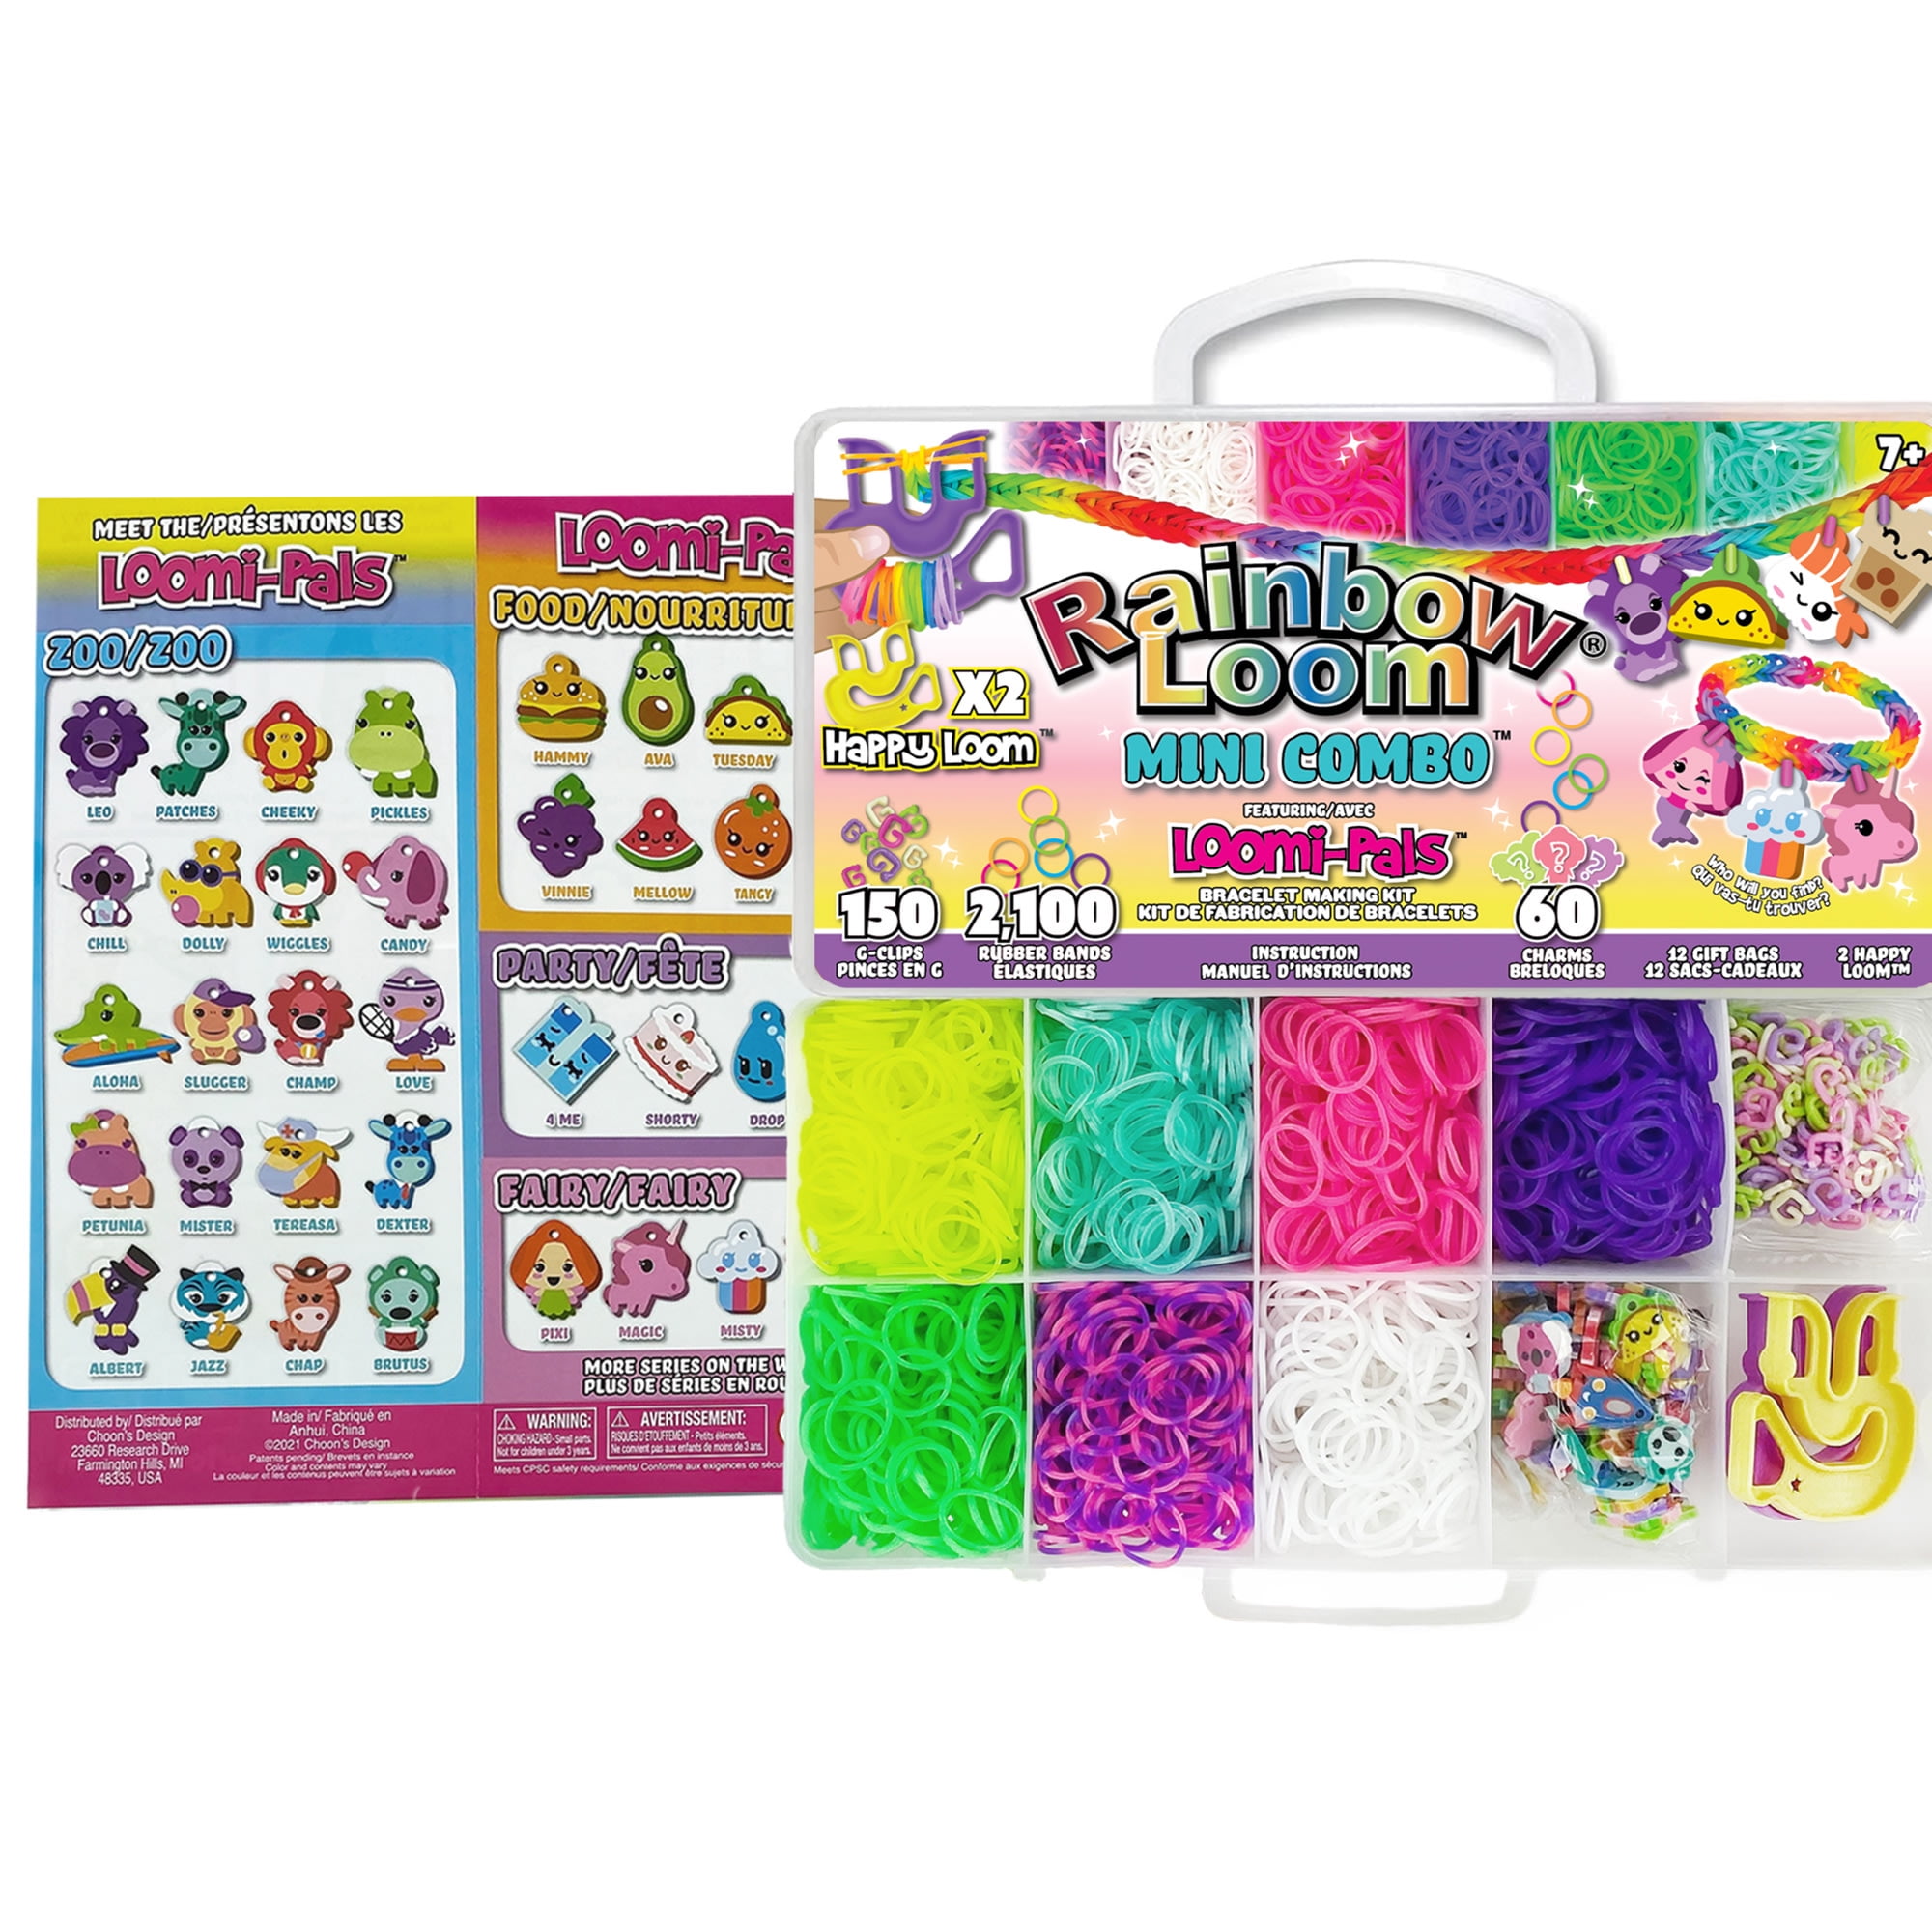 Rainbow Loom Creative Play in the Kids Play Toys department at